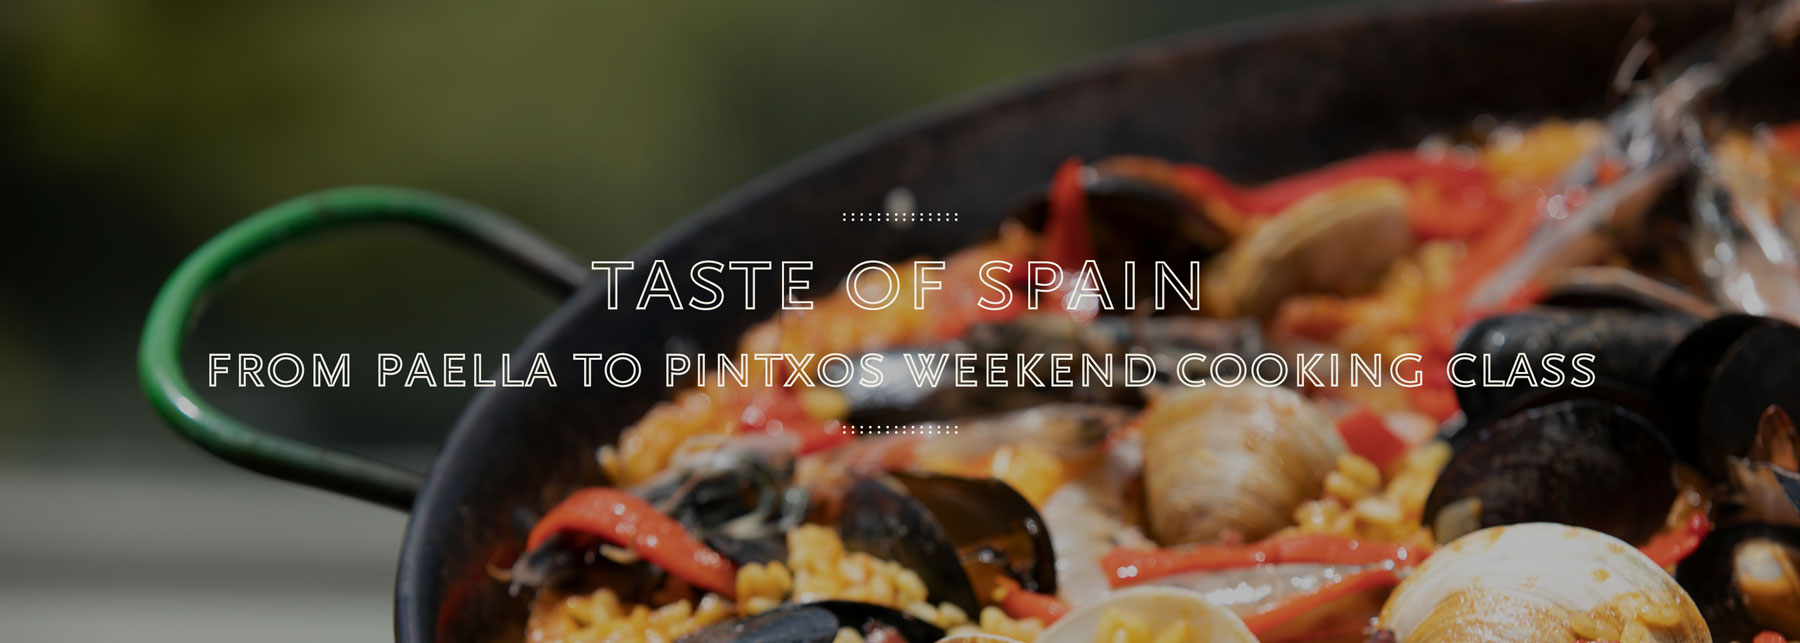 Taste of Spain: from Paella to Pintxos Weekend Cooking Class